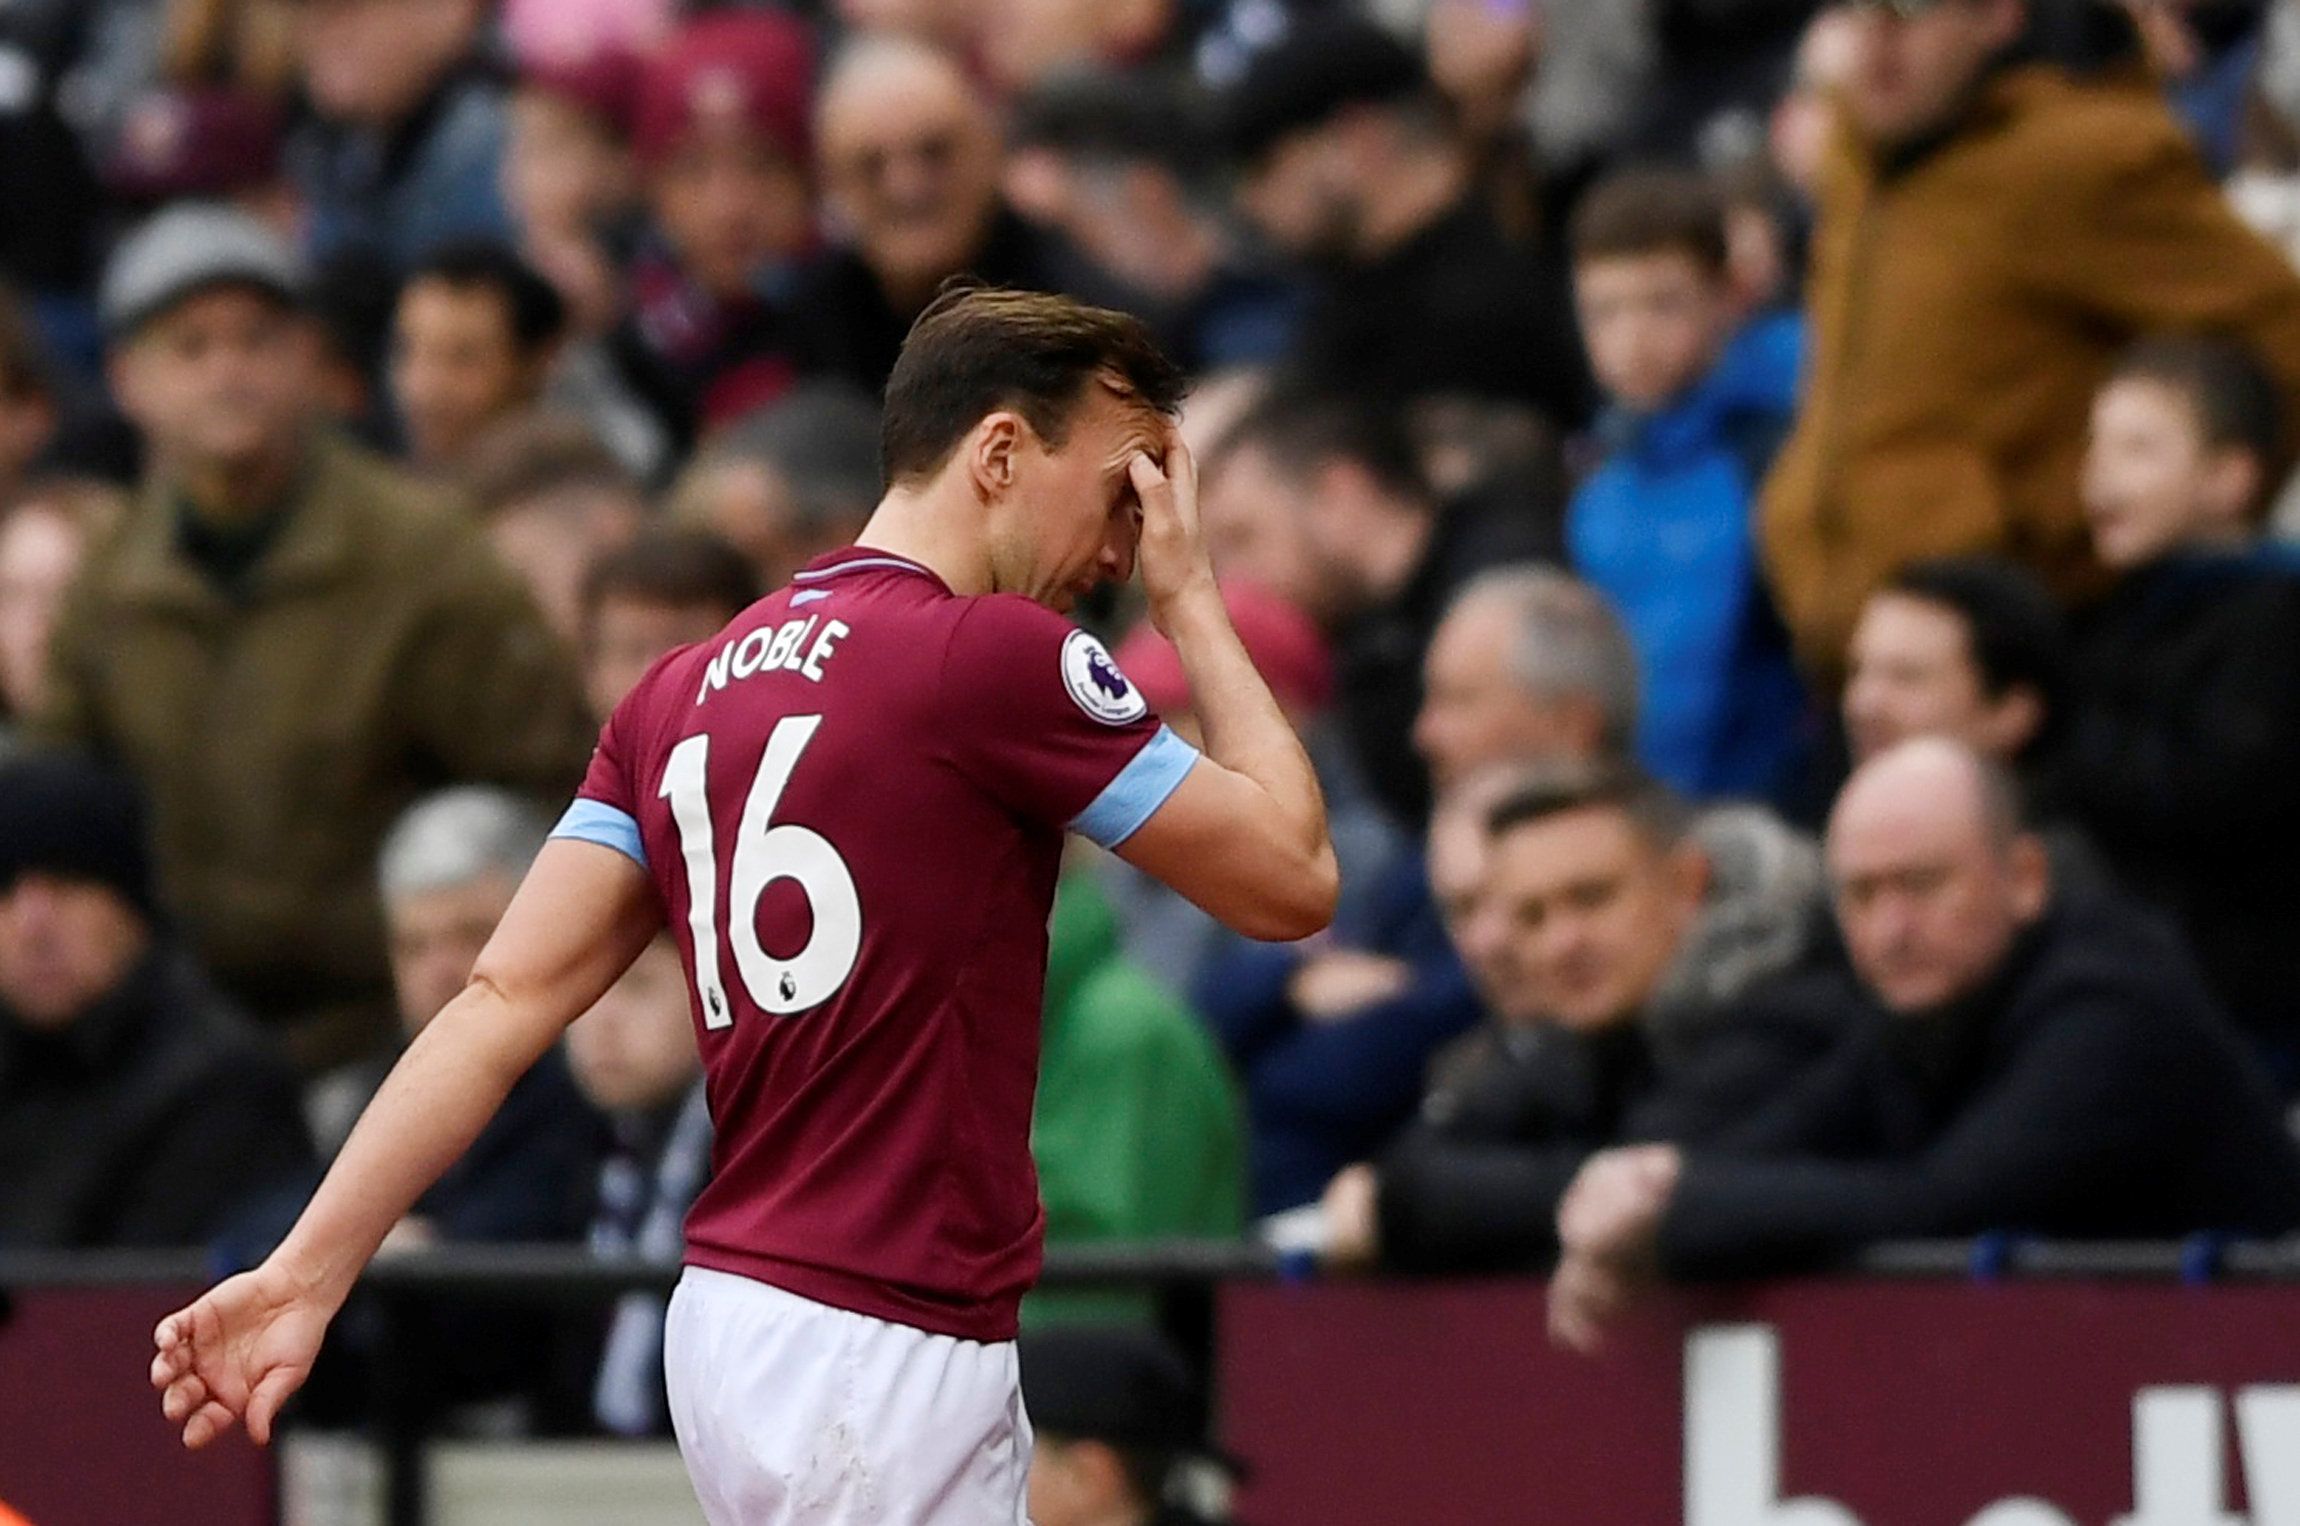 Soccer Football - Premier League - West Ham United v Huddersfield Town - London Stadium, London, Britain - March 16, 2019  West Ham's Mark Noble reacts after he is substituted             Action Images via Reuters/Tony O'Brien  EDITORIAL USE ONLY. No use with unauthorized audio, video, data, fixture lists, club/league logos or "live" services. Online in-match use limited to 75 images, no video emulation. No use in betting, games or single club/league/player publications.  Please contact your acc